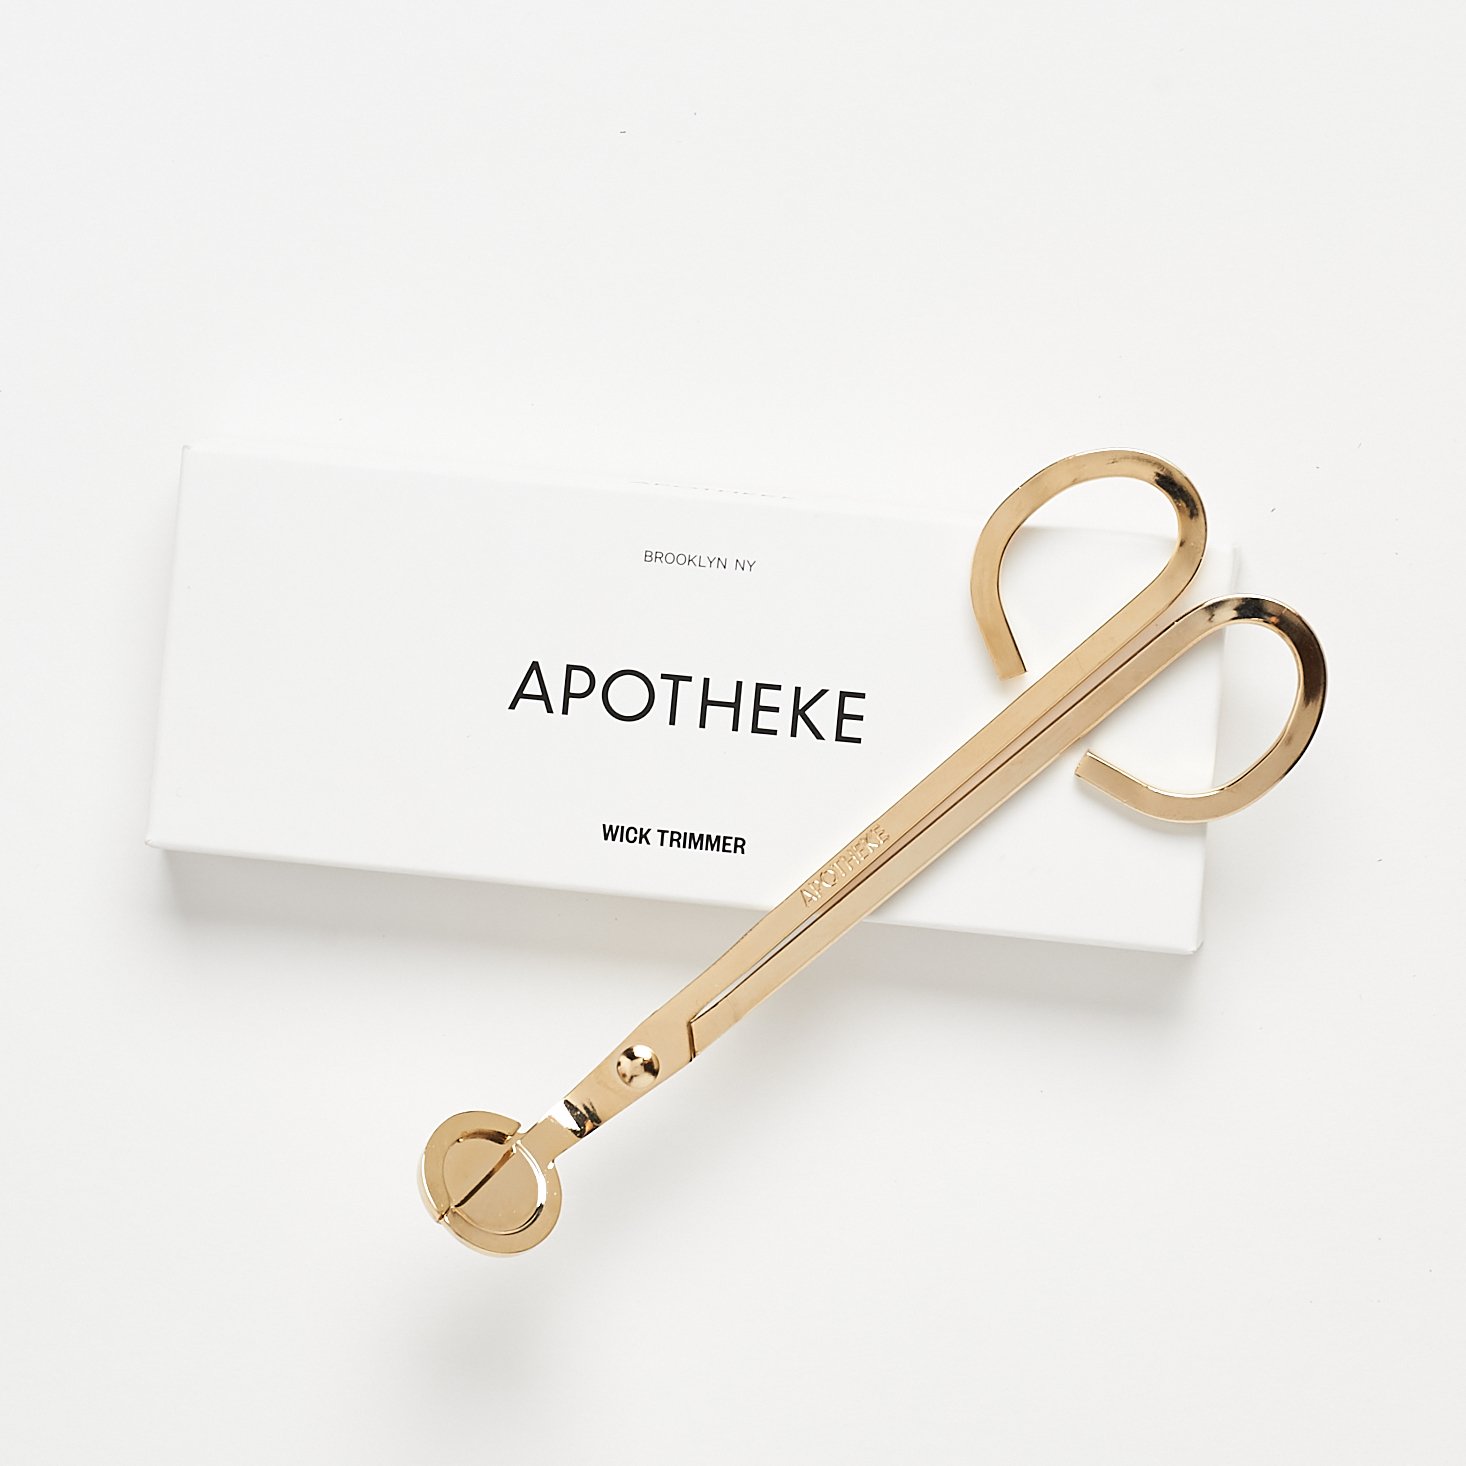 Apotheke Wick Trimmer leaning against box